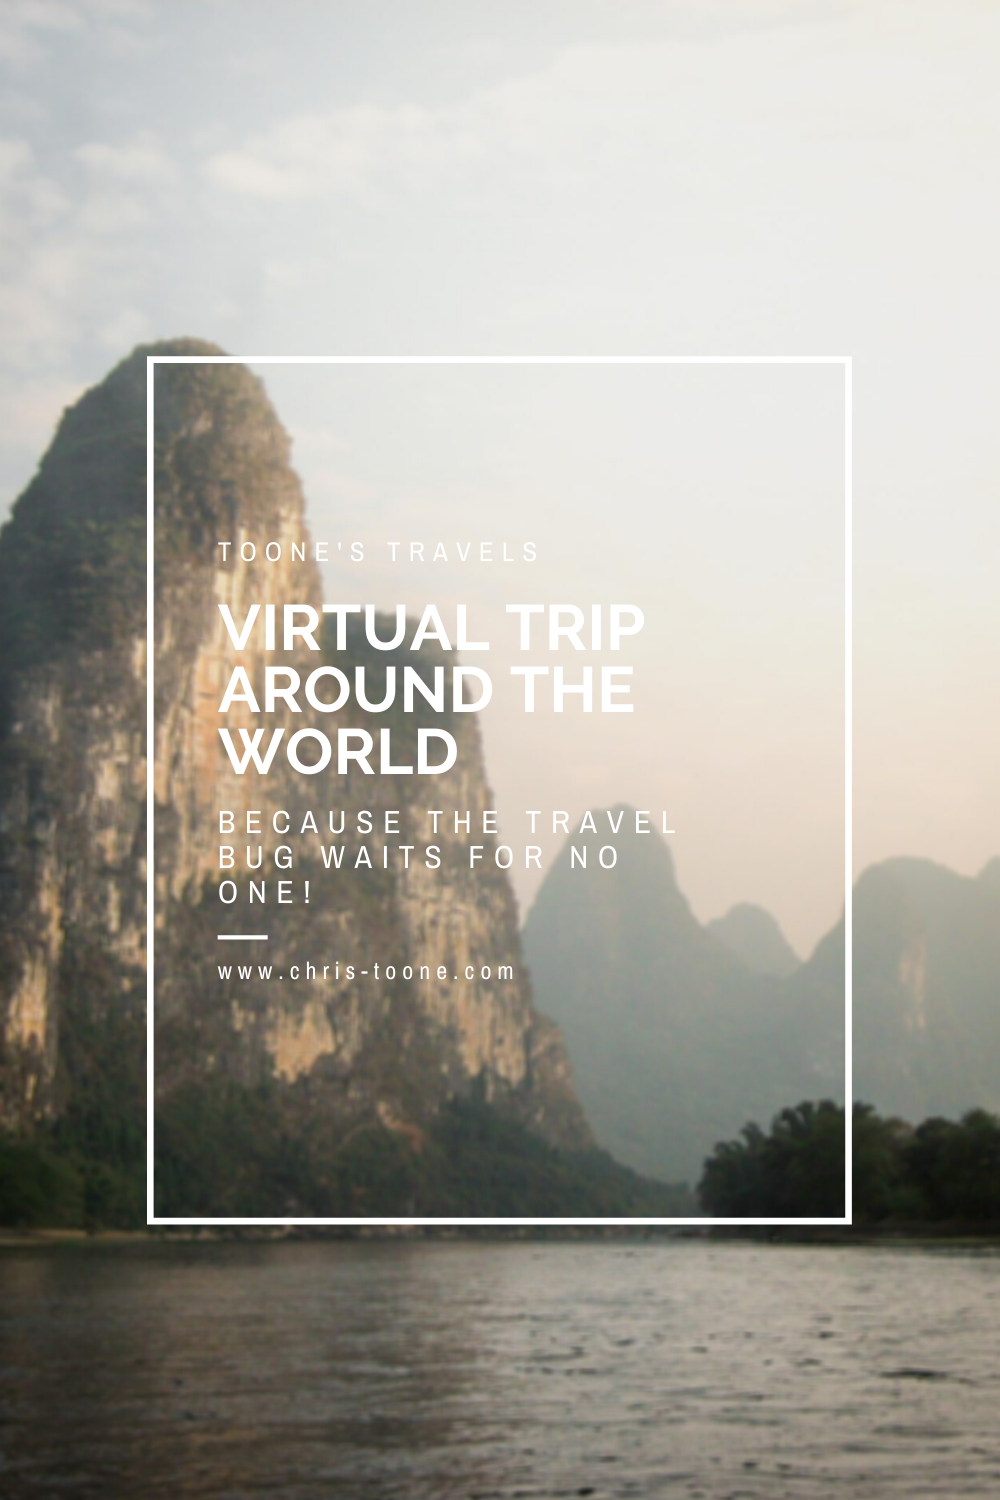 Virtual Trip Around the World: Because the travel bug waits for no one!